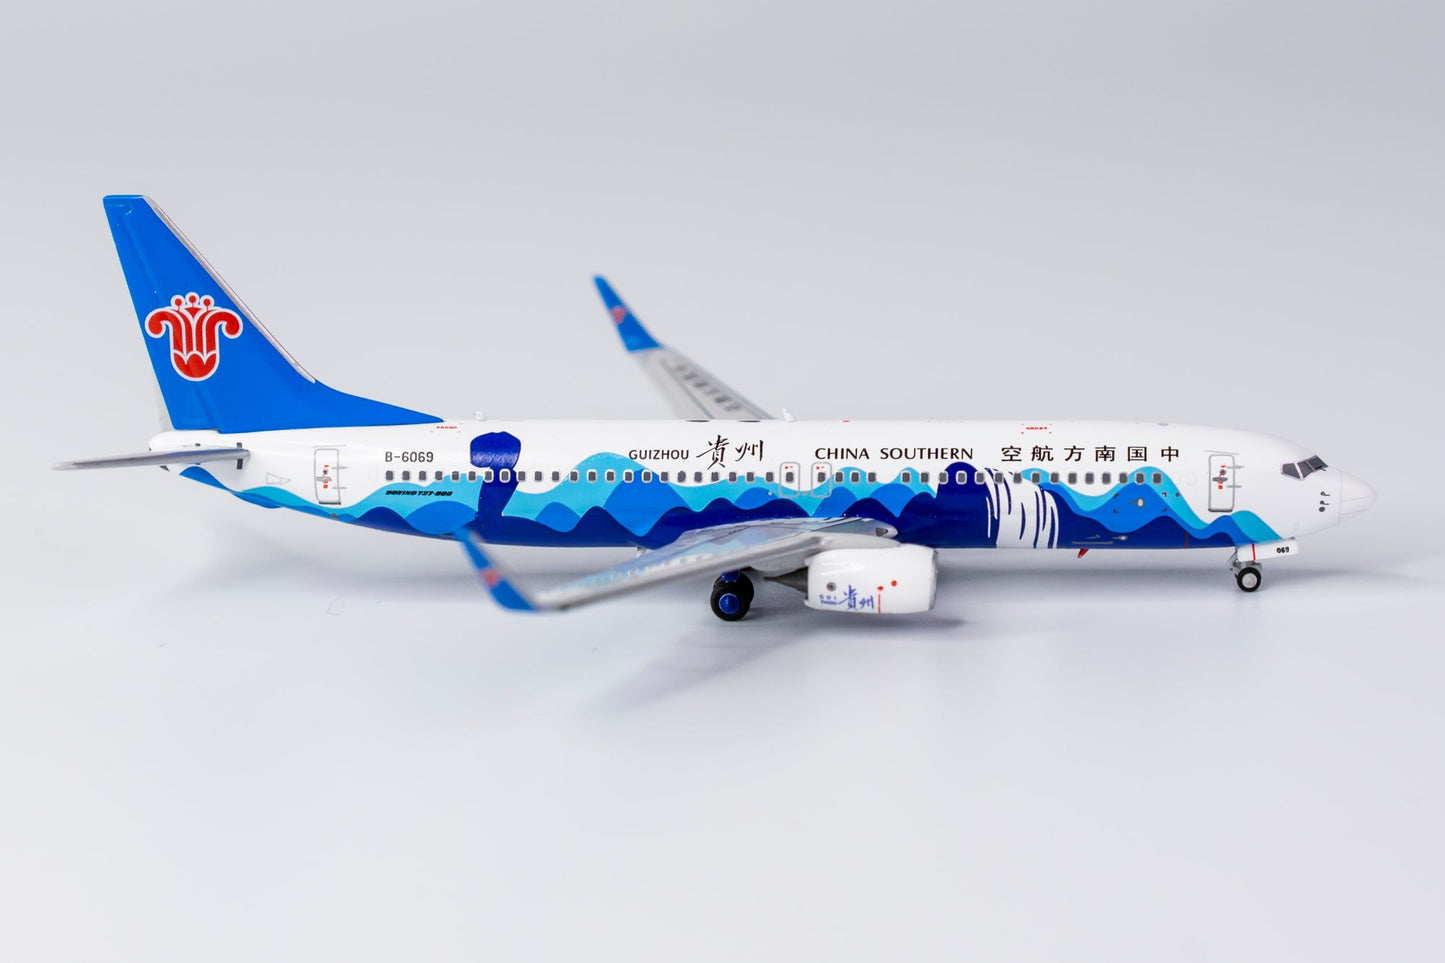 1/400 China Southern Airlines B 737-800/w "Guizhou #2 Livery" NG Models 58115